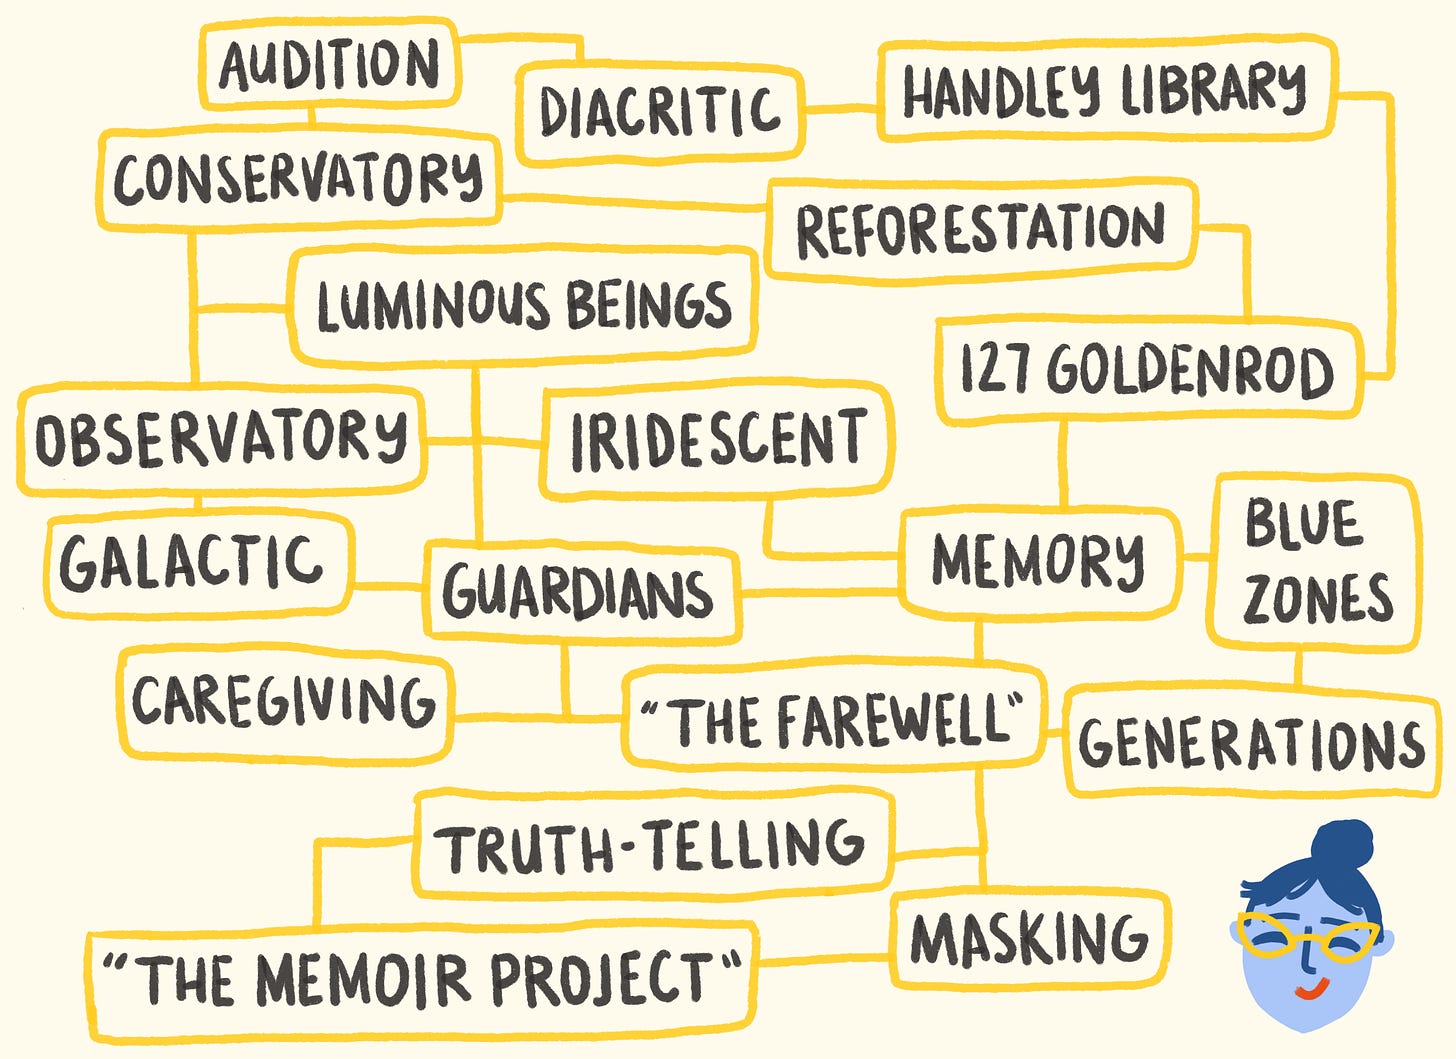 Digitally drawn mind map with topics like "iridescent," "luminous beings," "galactic," "memory," "Handley Library," etc